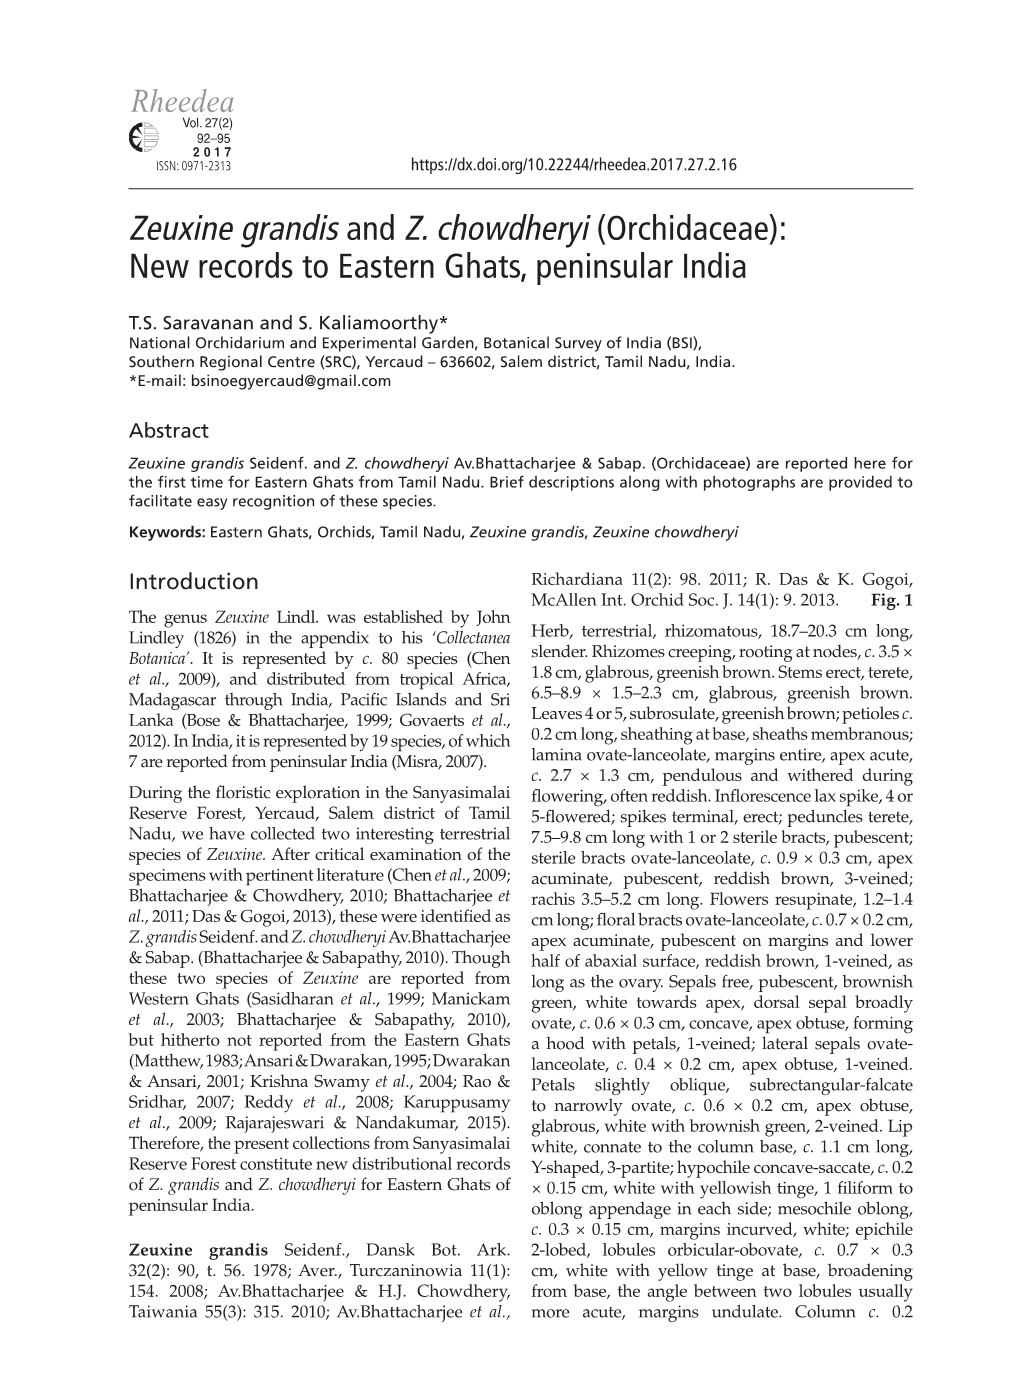 Zeuxine Grandis and Z. Chowdheryi (Orchidaceae): New Records to Eastern Ghats, Peninsular India